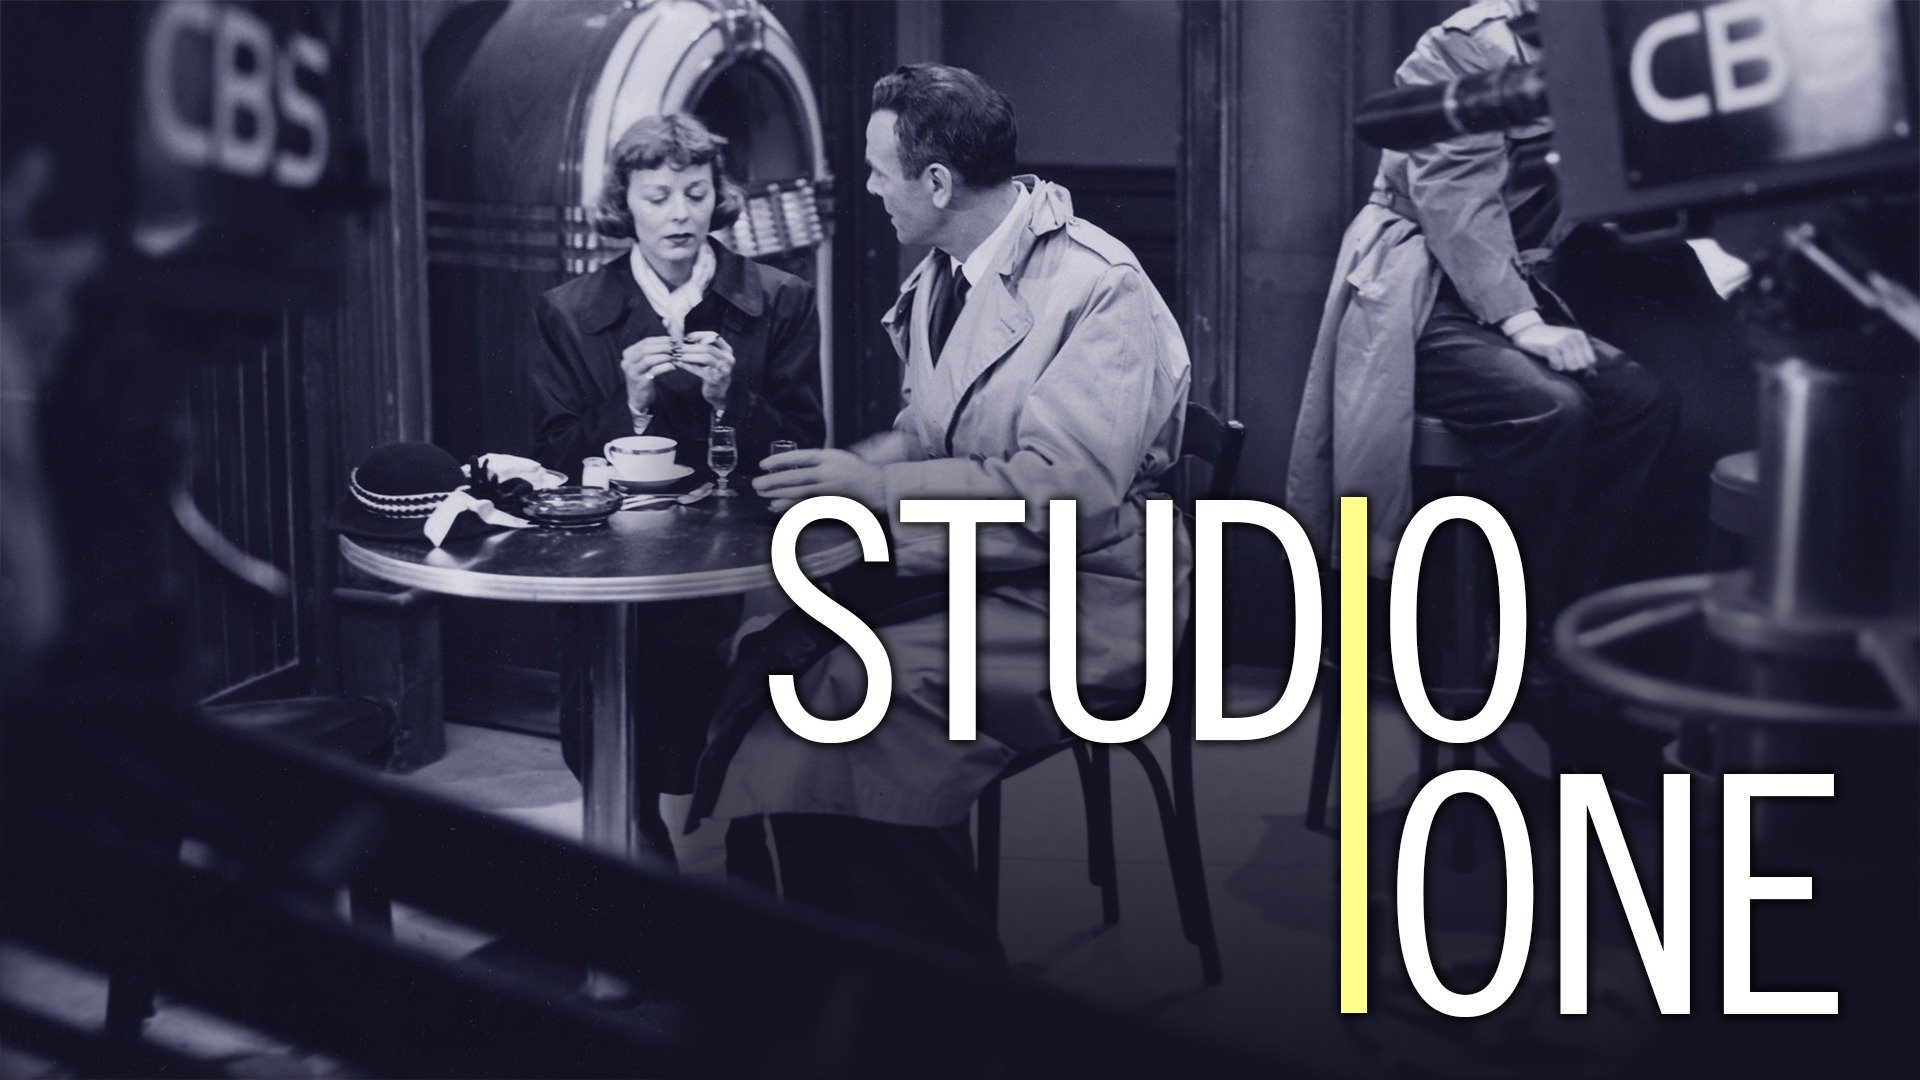 Studio One - CBS Anthology Series - Where To Watch